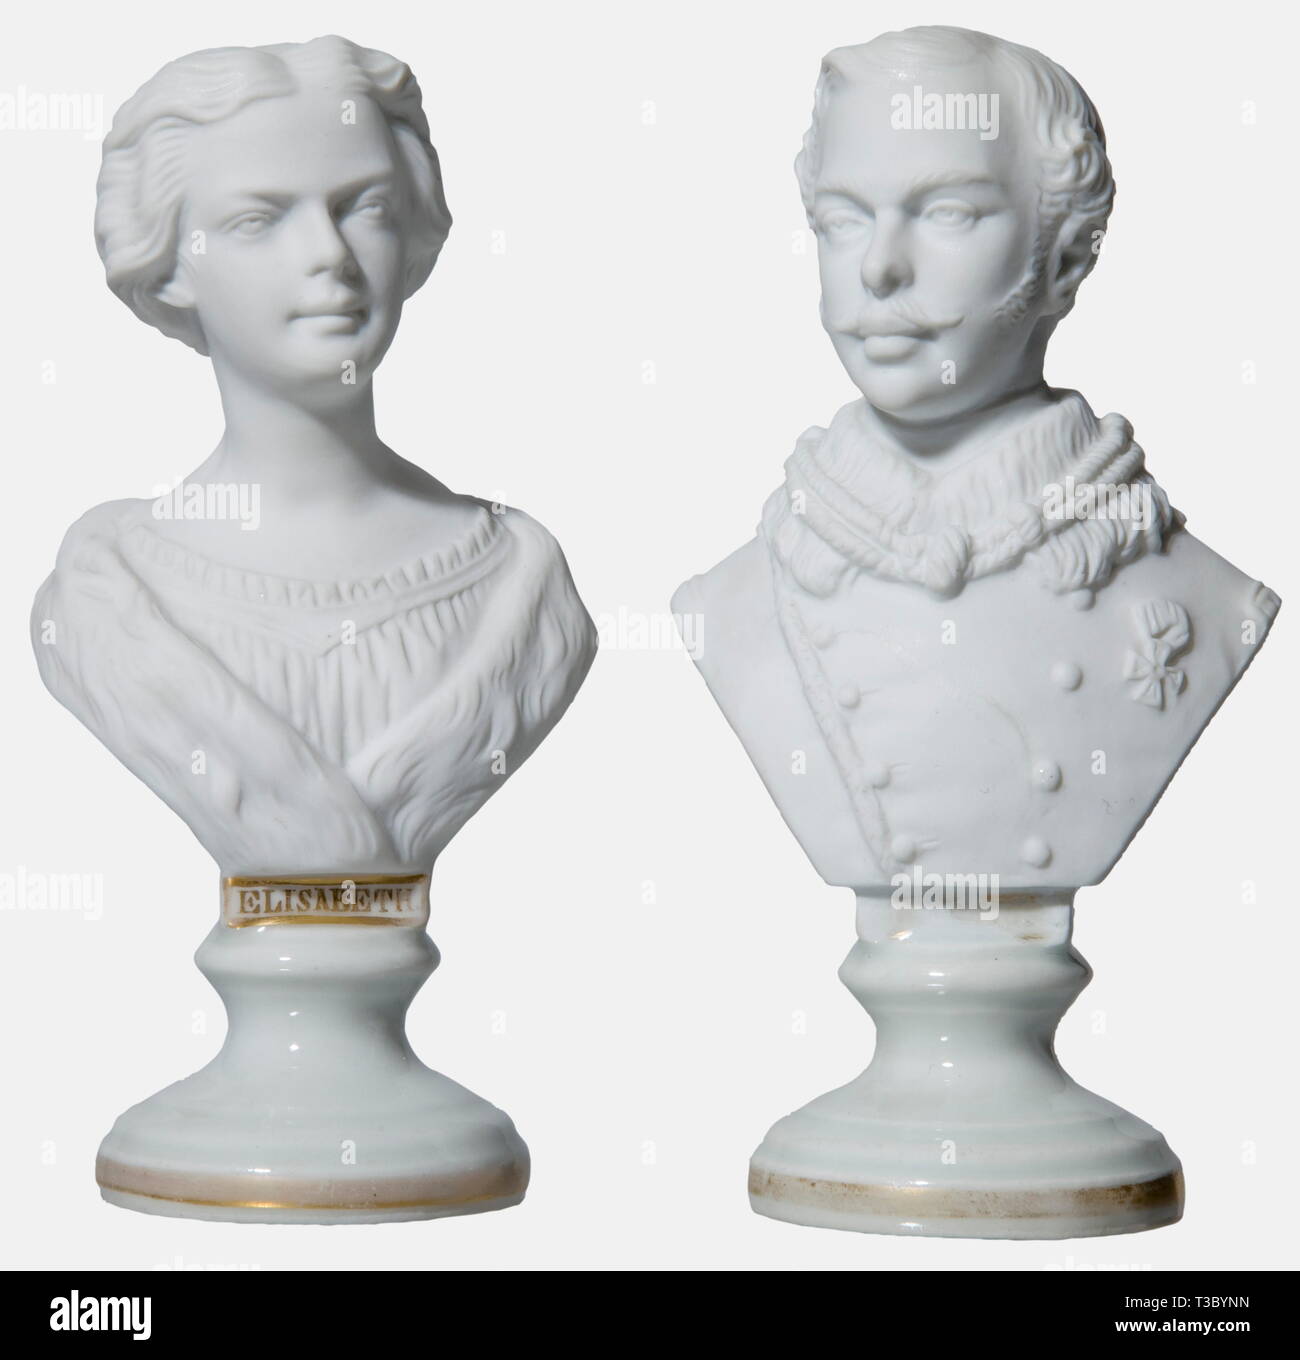 Kaiser Franz Joseph I and Empress Elisabeth of Austria, a pair of busts made from bisque, Vienna Porcelain Manufactory dated '(1)855' and '(1)854'. The emperor in uniform with orders, the empress in a dress with a furred cape. The round bases are both glazed, with golden name inscriptions (the one of the emperor completely rubbed) and golden rim (partly rubbed). Stamped on the bottom with Austrian escutcheon per fess marks, dates '855' and '854' as well as the numbers '36' and '35'. Height 13.4 and 13.2 cm. Rare and early busts of the newly wed i, Additional-Rights-Clearance-Info-Not-Available Stock Photo